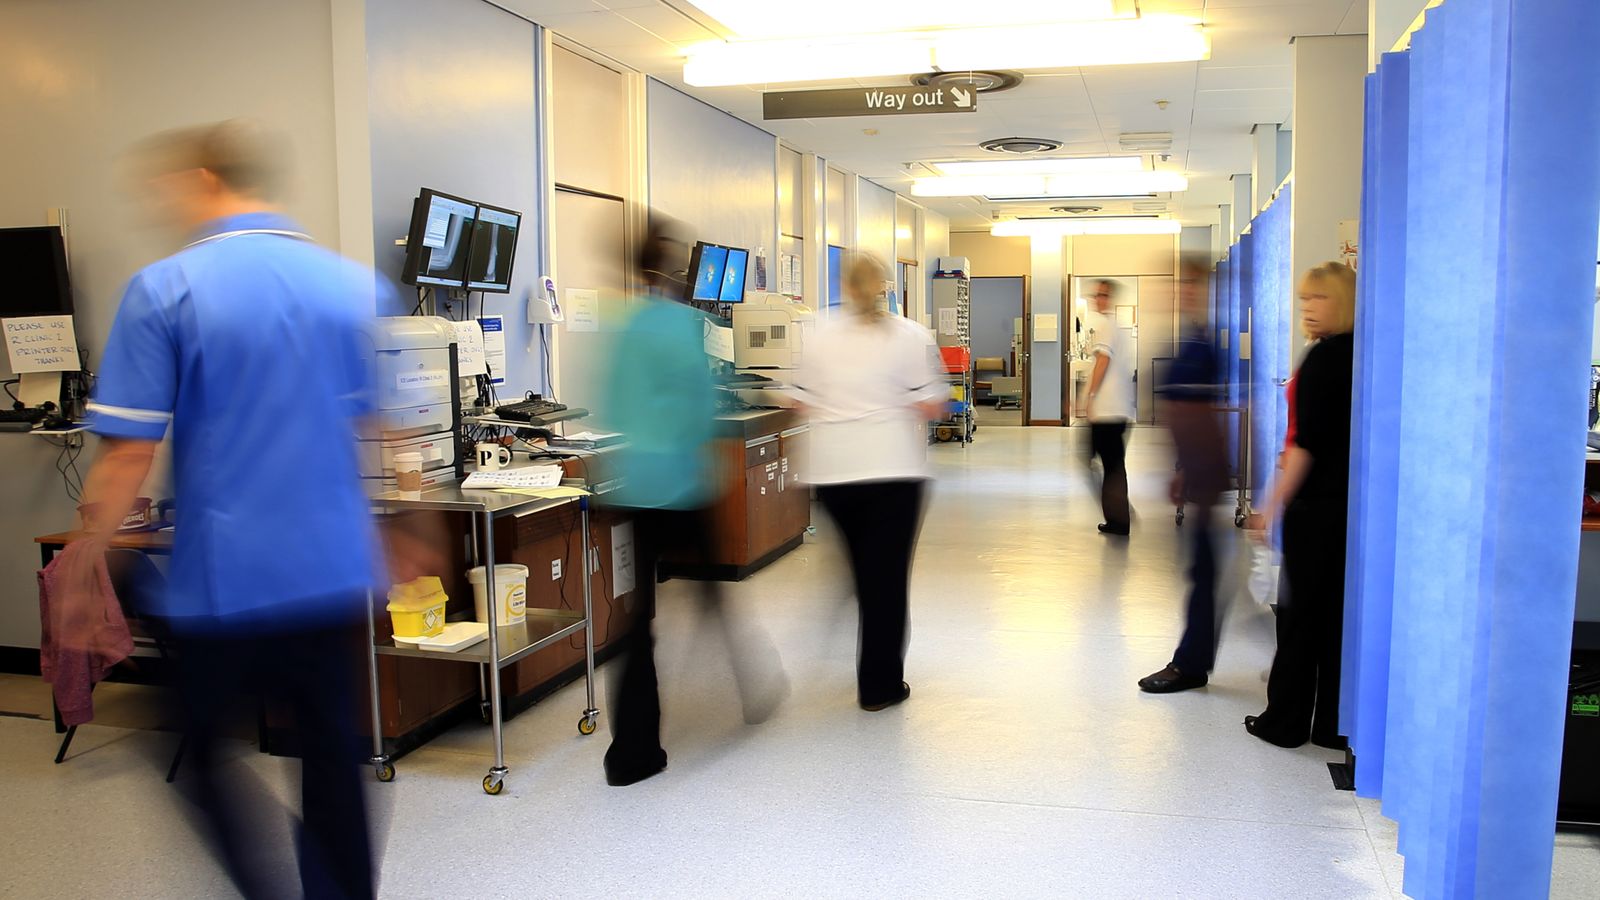 NHS workers had to be given salary top-up to avoid minimum wage breach, GMB union head says